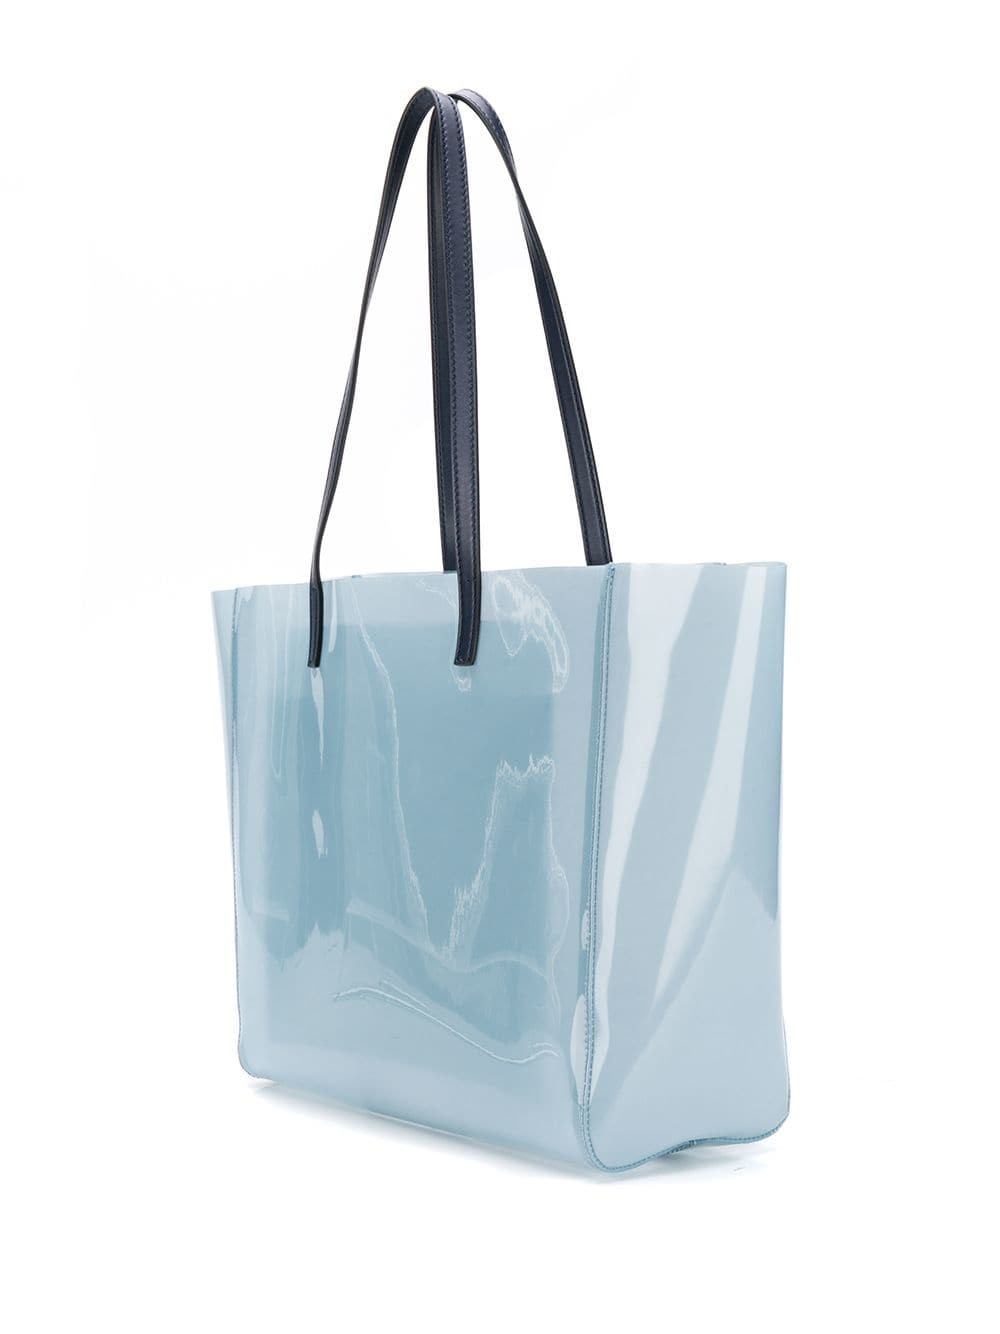 stella mccartney SHOPPING TOTE available on montiboutique.com - 28047